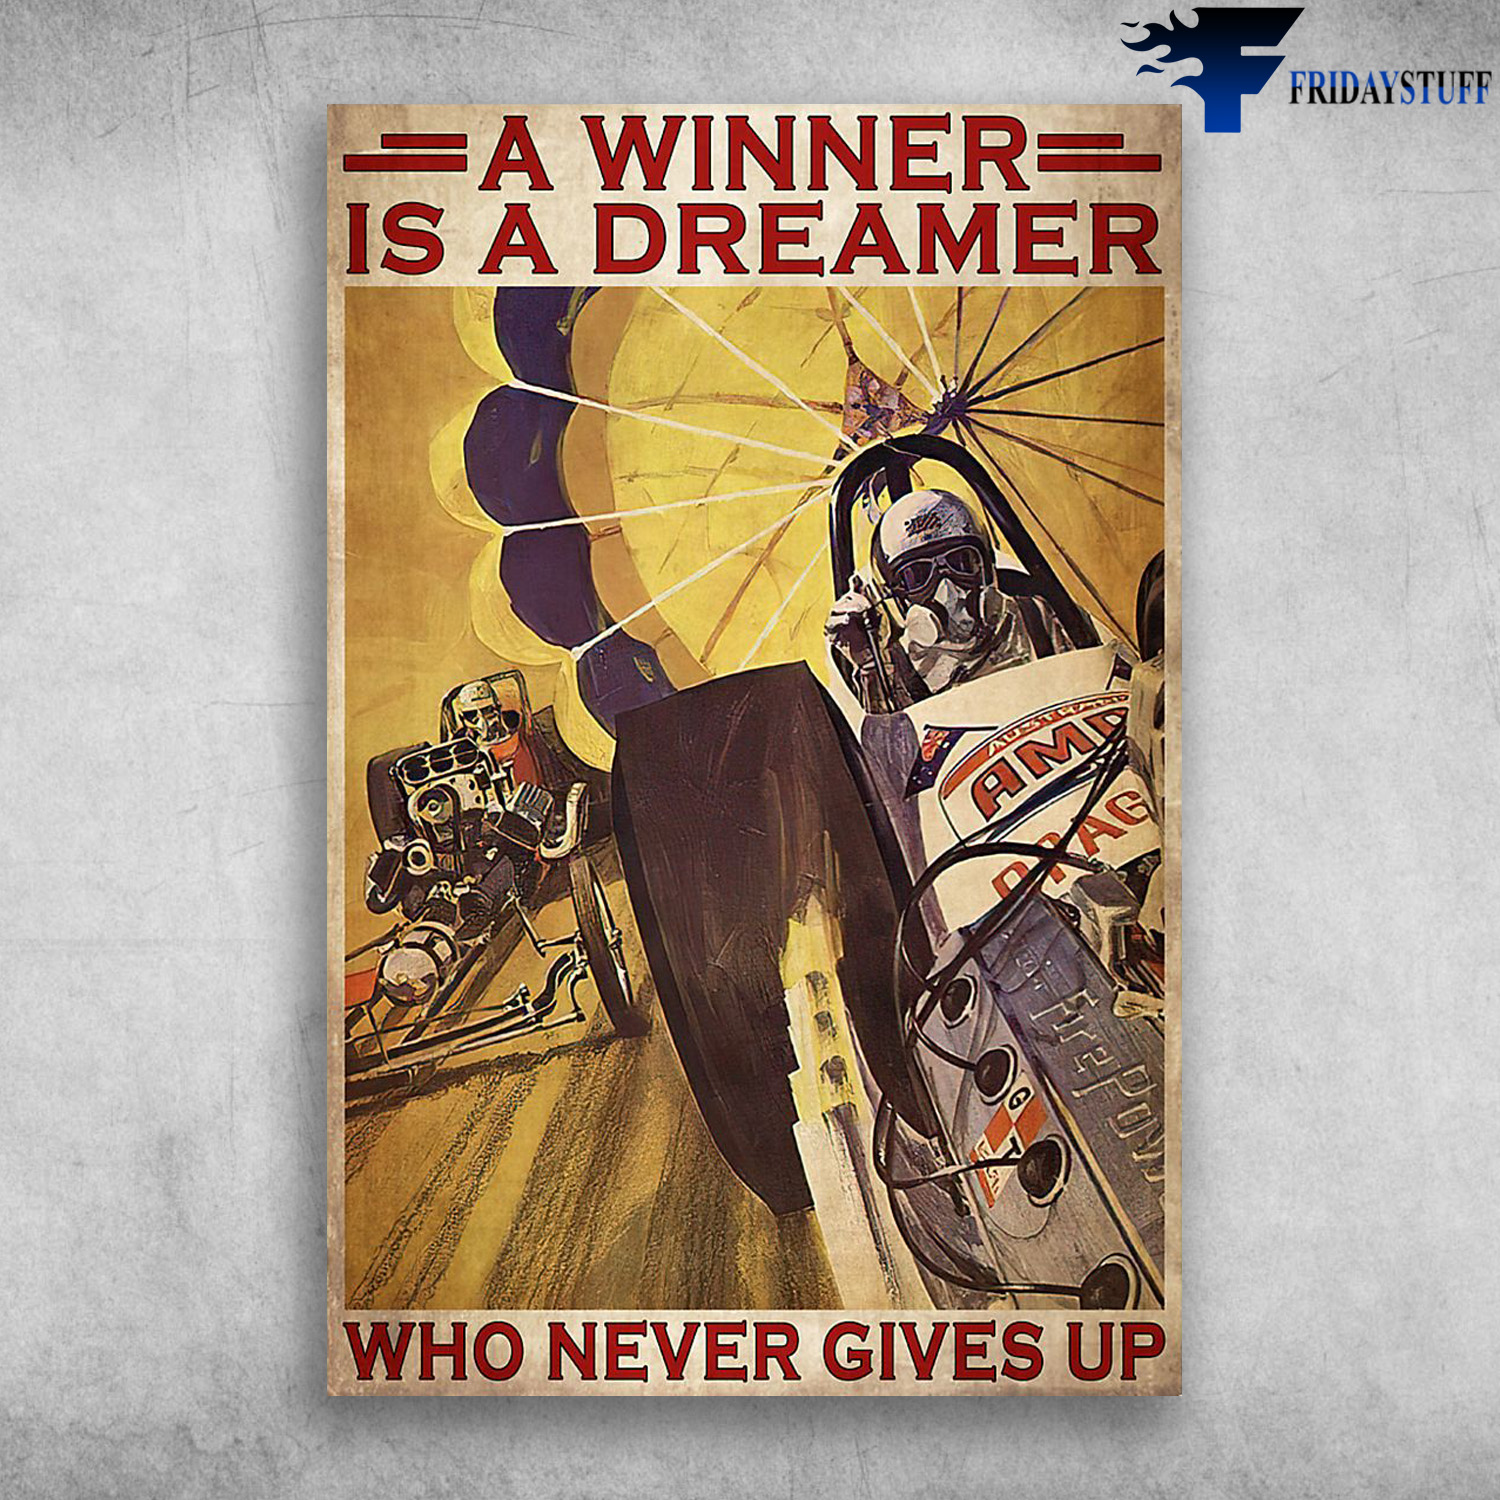 Drag Racers On The Track - A Winner Is A Dreamer, Who Never Gives Up